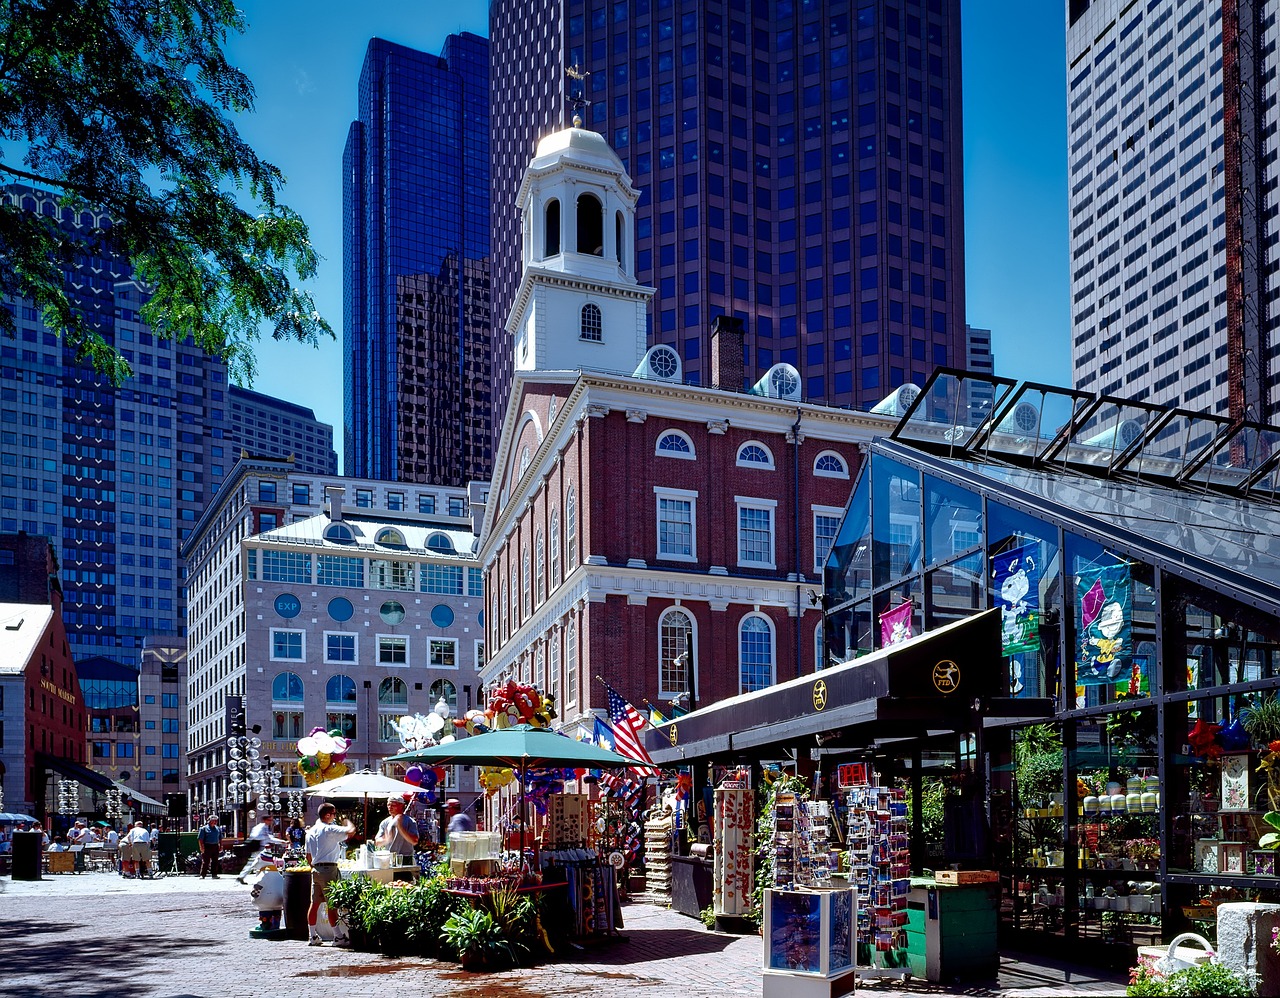 Family Fun in Boston: Duck Tours, Gardens, and History